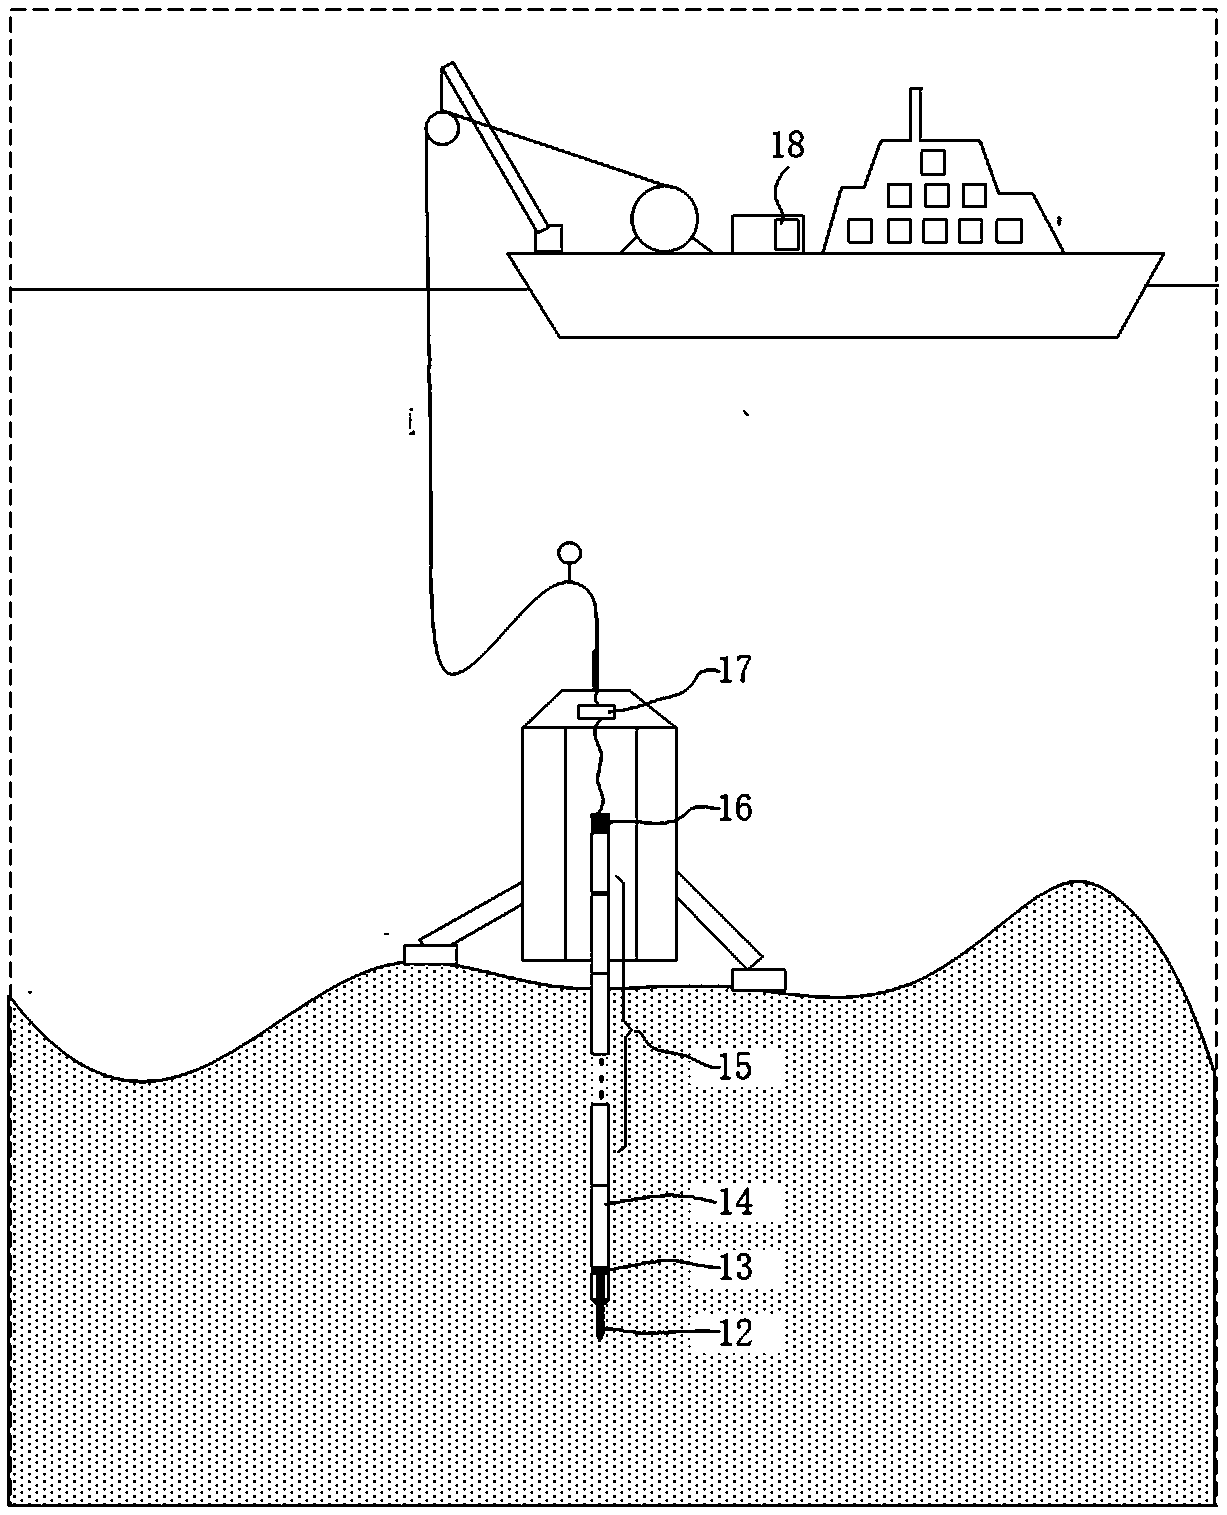 Static sounding signal wireless acoustic transmitter-receiver assembly based on seabed drilling machine